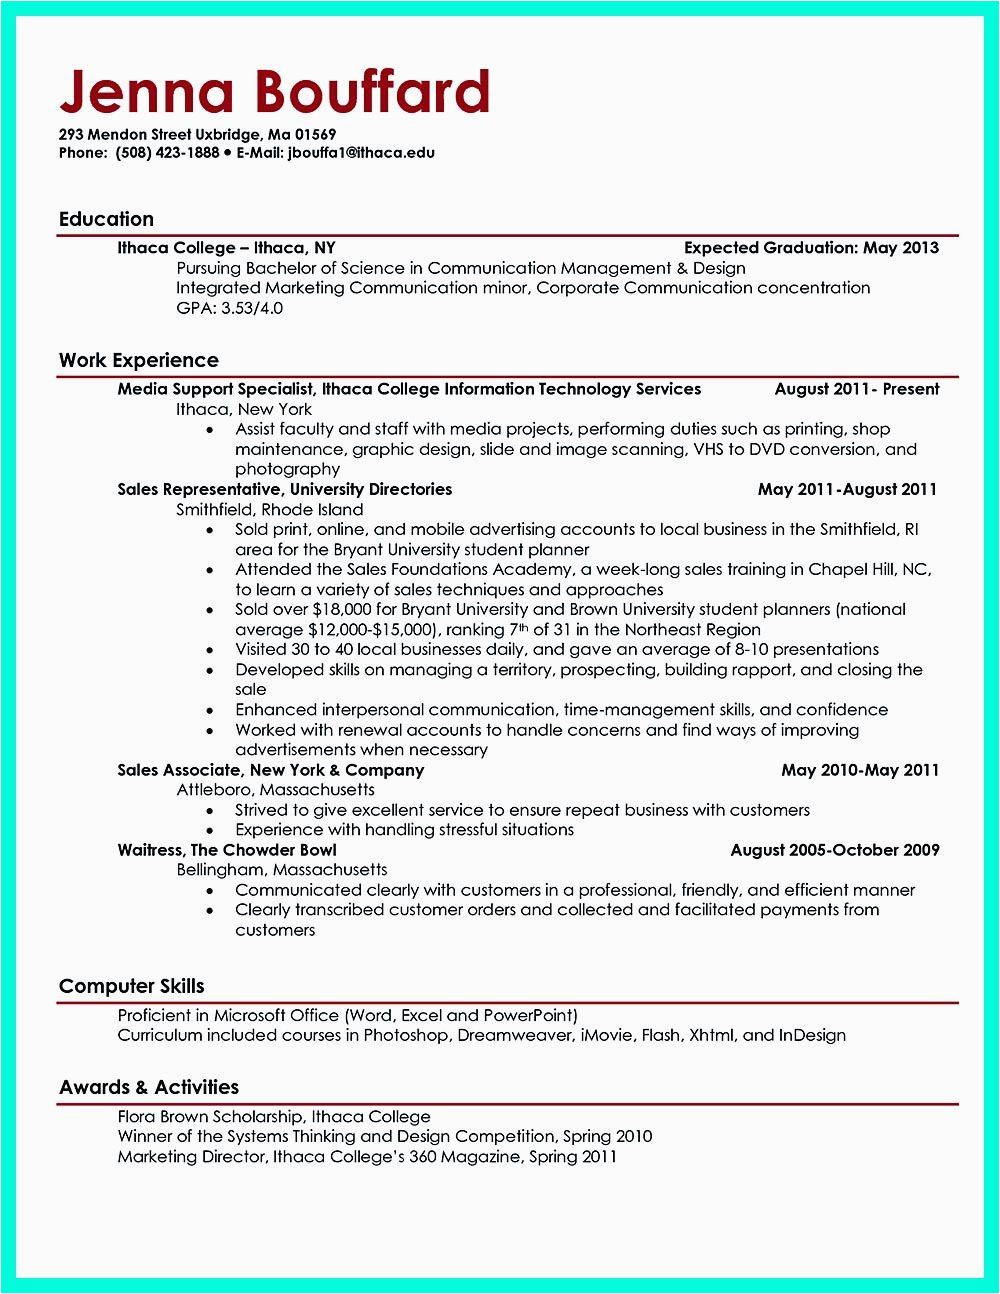 Sample Resume for A Current College Student Best Current College Student Resume with No Experience